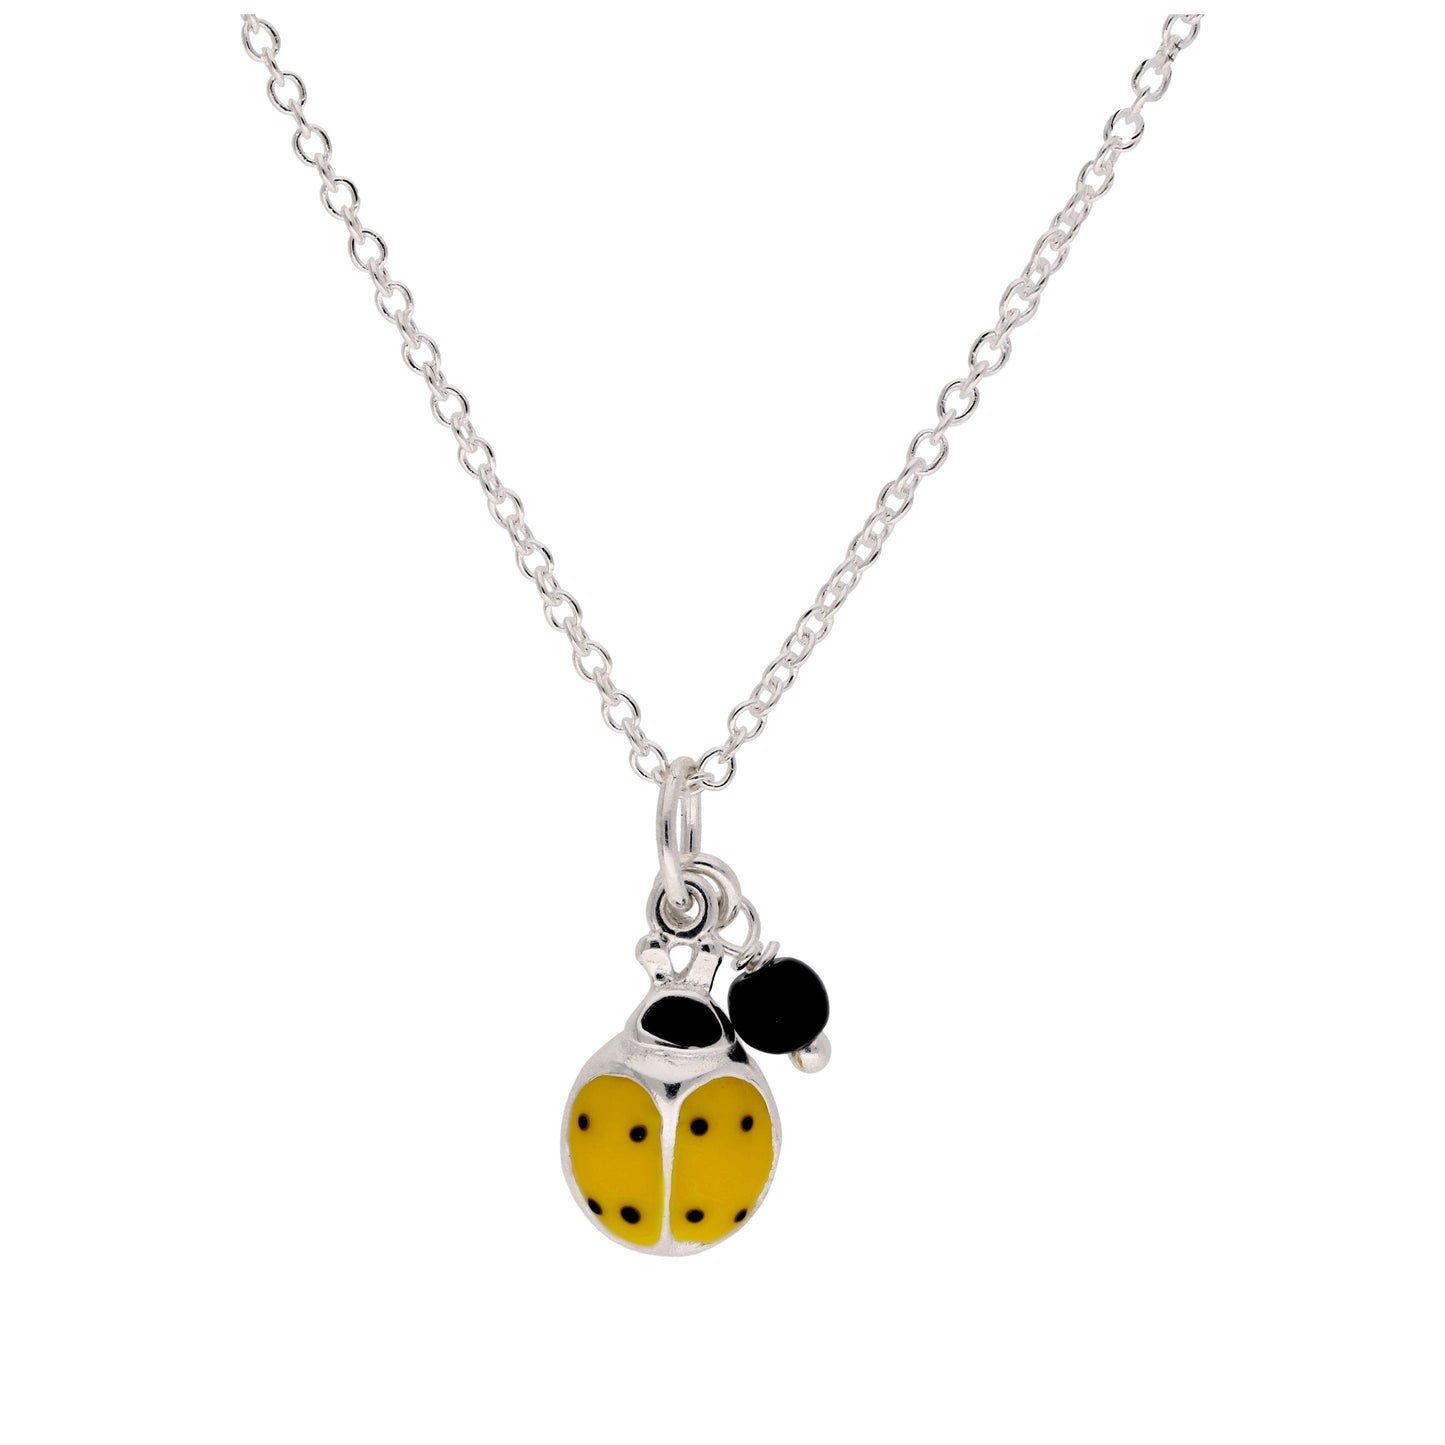 Sterling Silver & Yellow Enamel Ladybird Necklace - 16 - 32 Inches